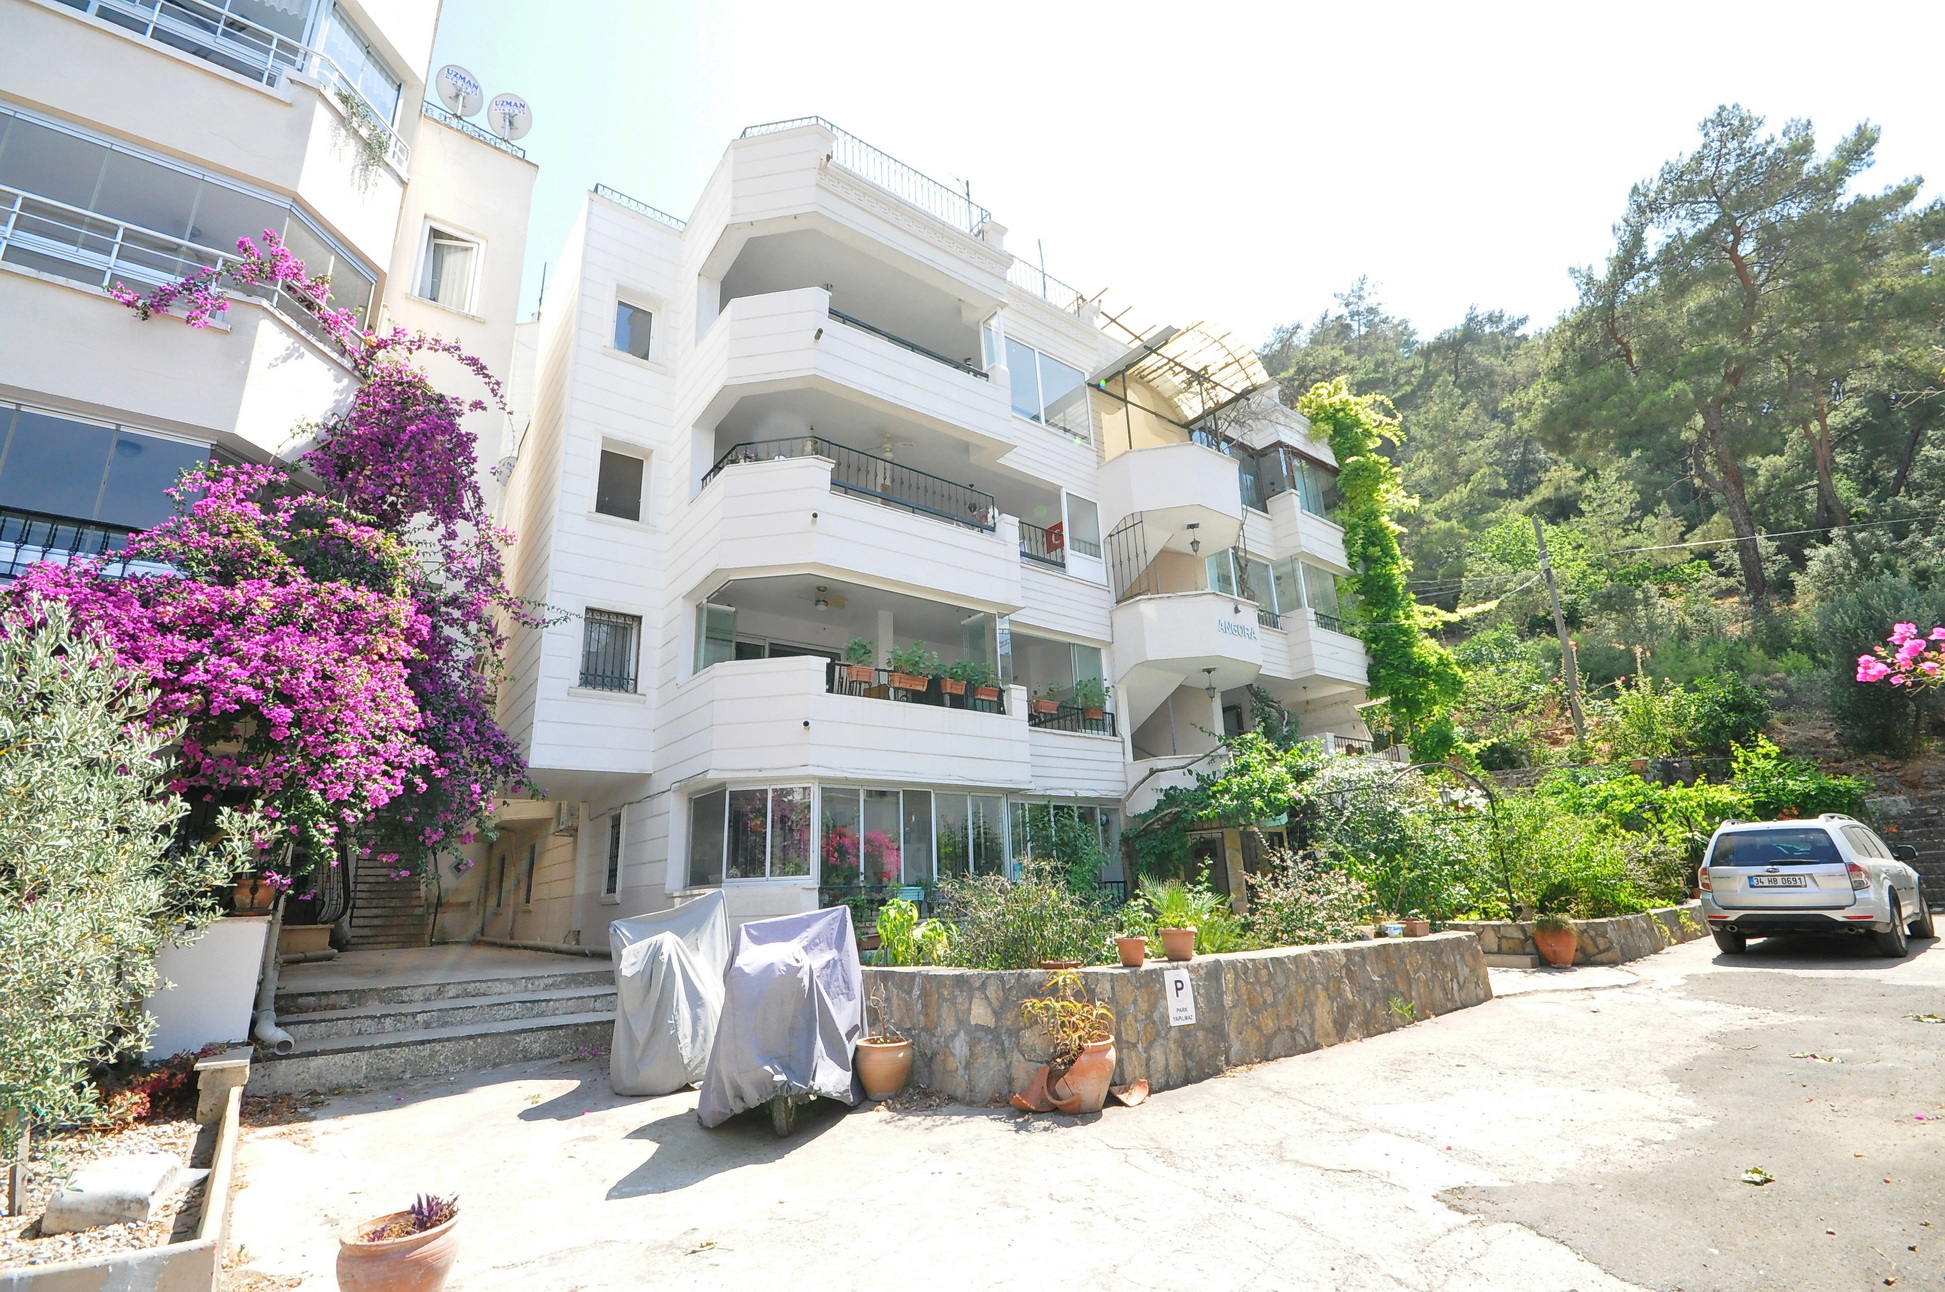 Beautifully Presented 3 Bedroom First Floor Apartment with Shared Pool In Fethiye